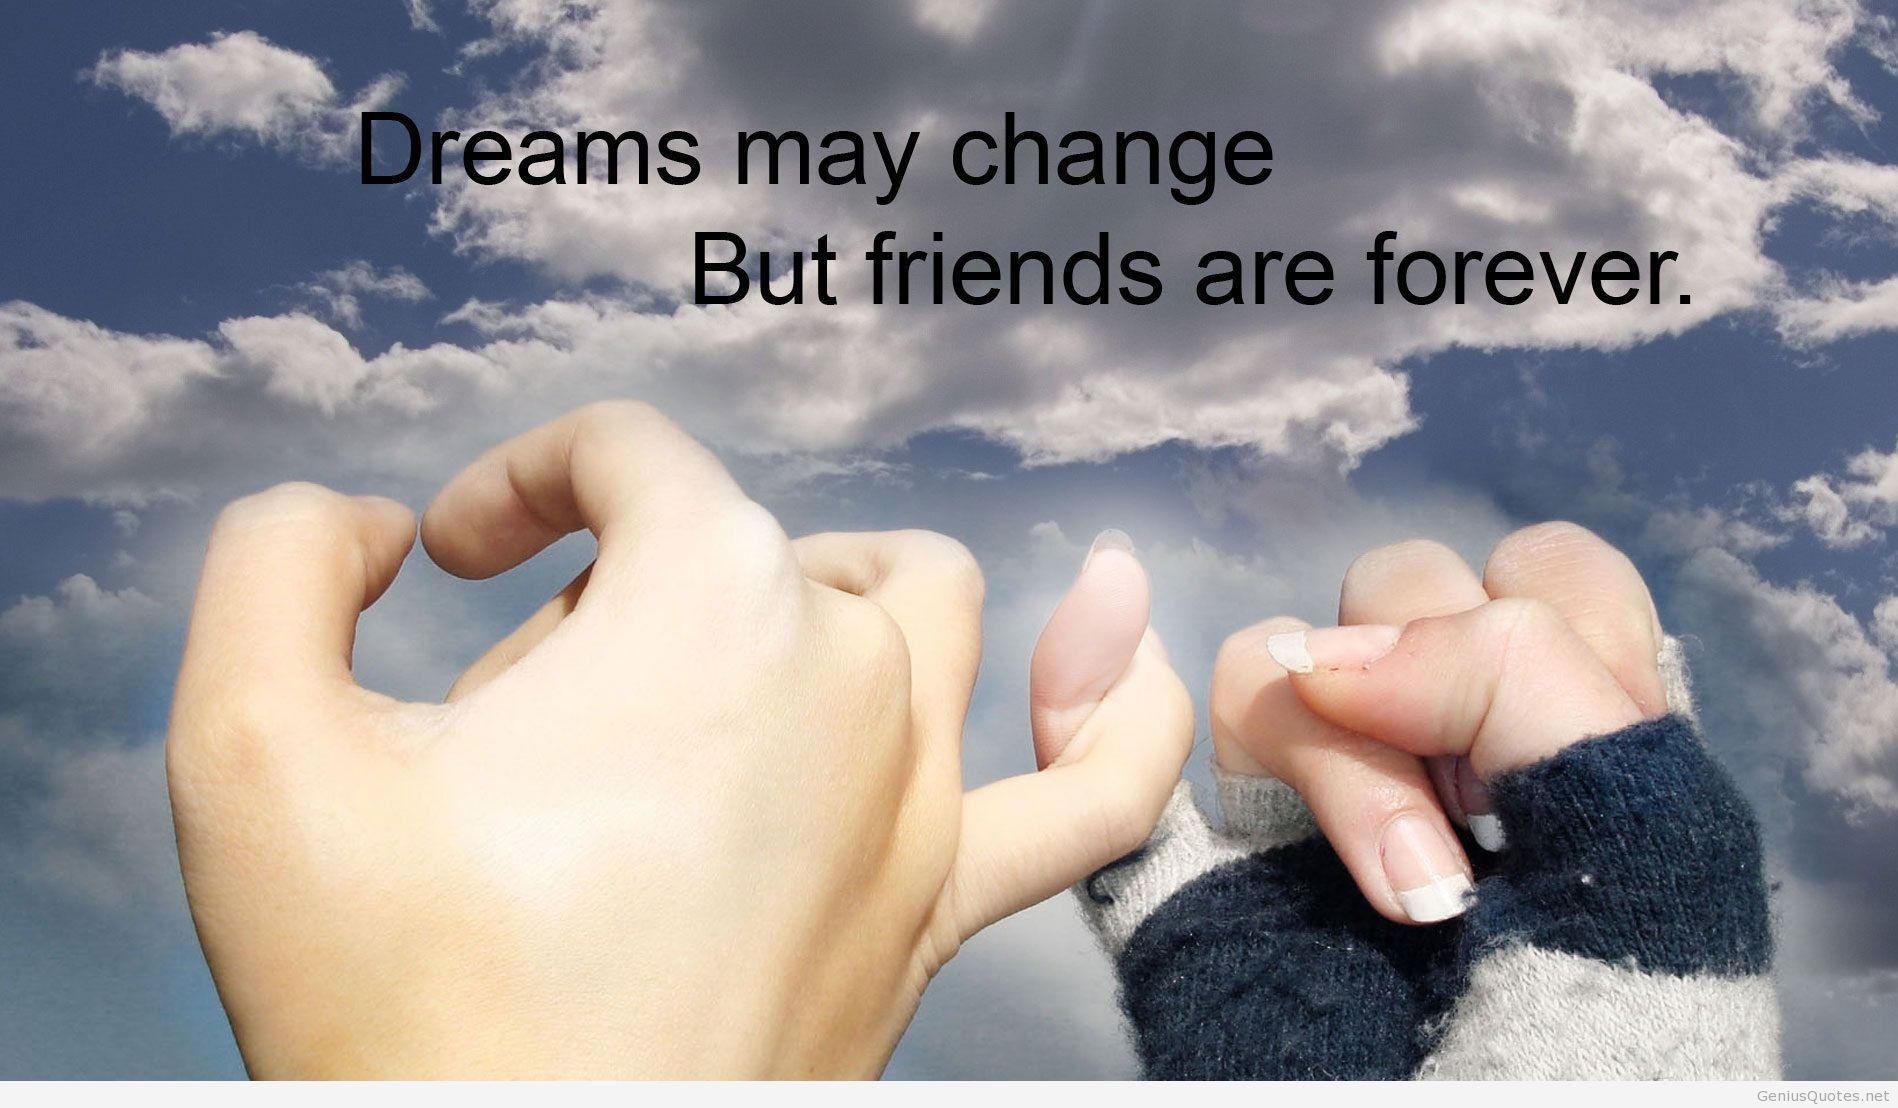 Friends are forever image quote. Friendship <3